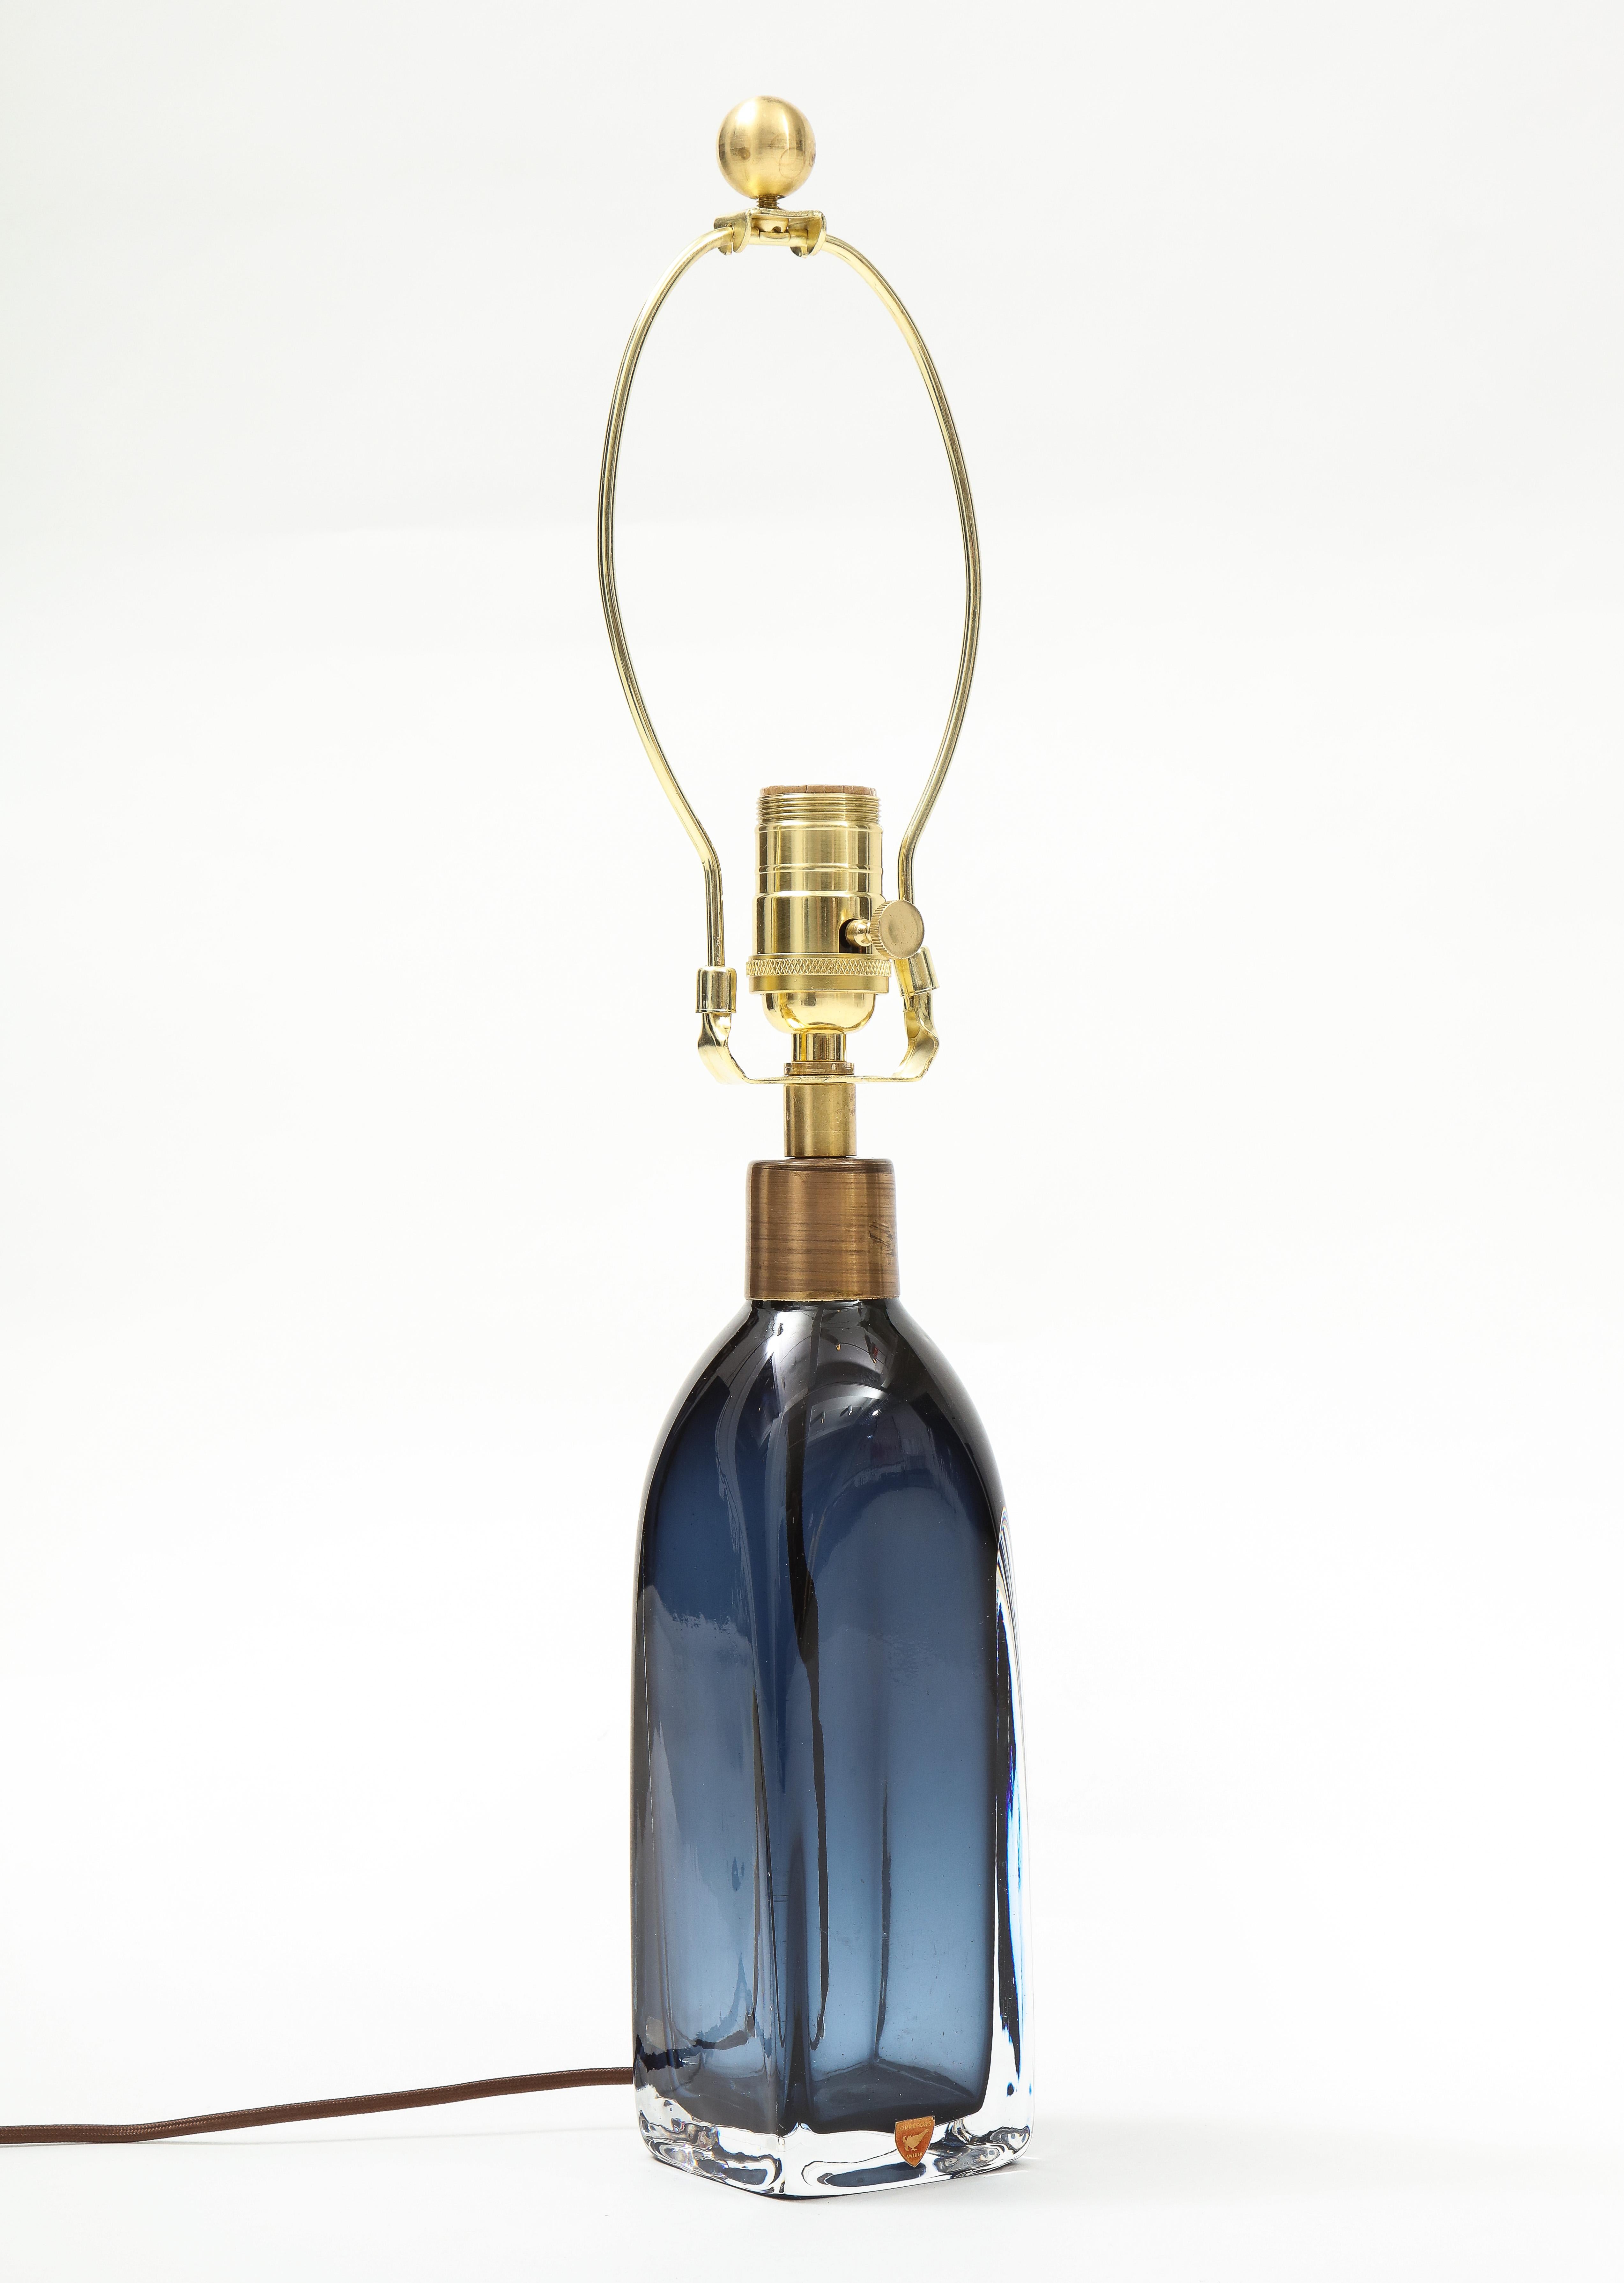 Rectangular sapphire blue crystal lamp with brass fittings
that has been newly rewired fir the US and takes a standard size light
bulb with a 75 watt maximum.